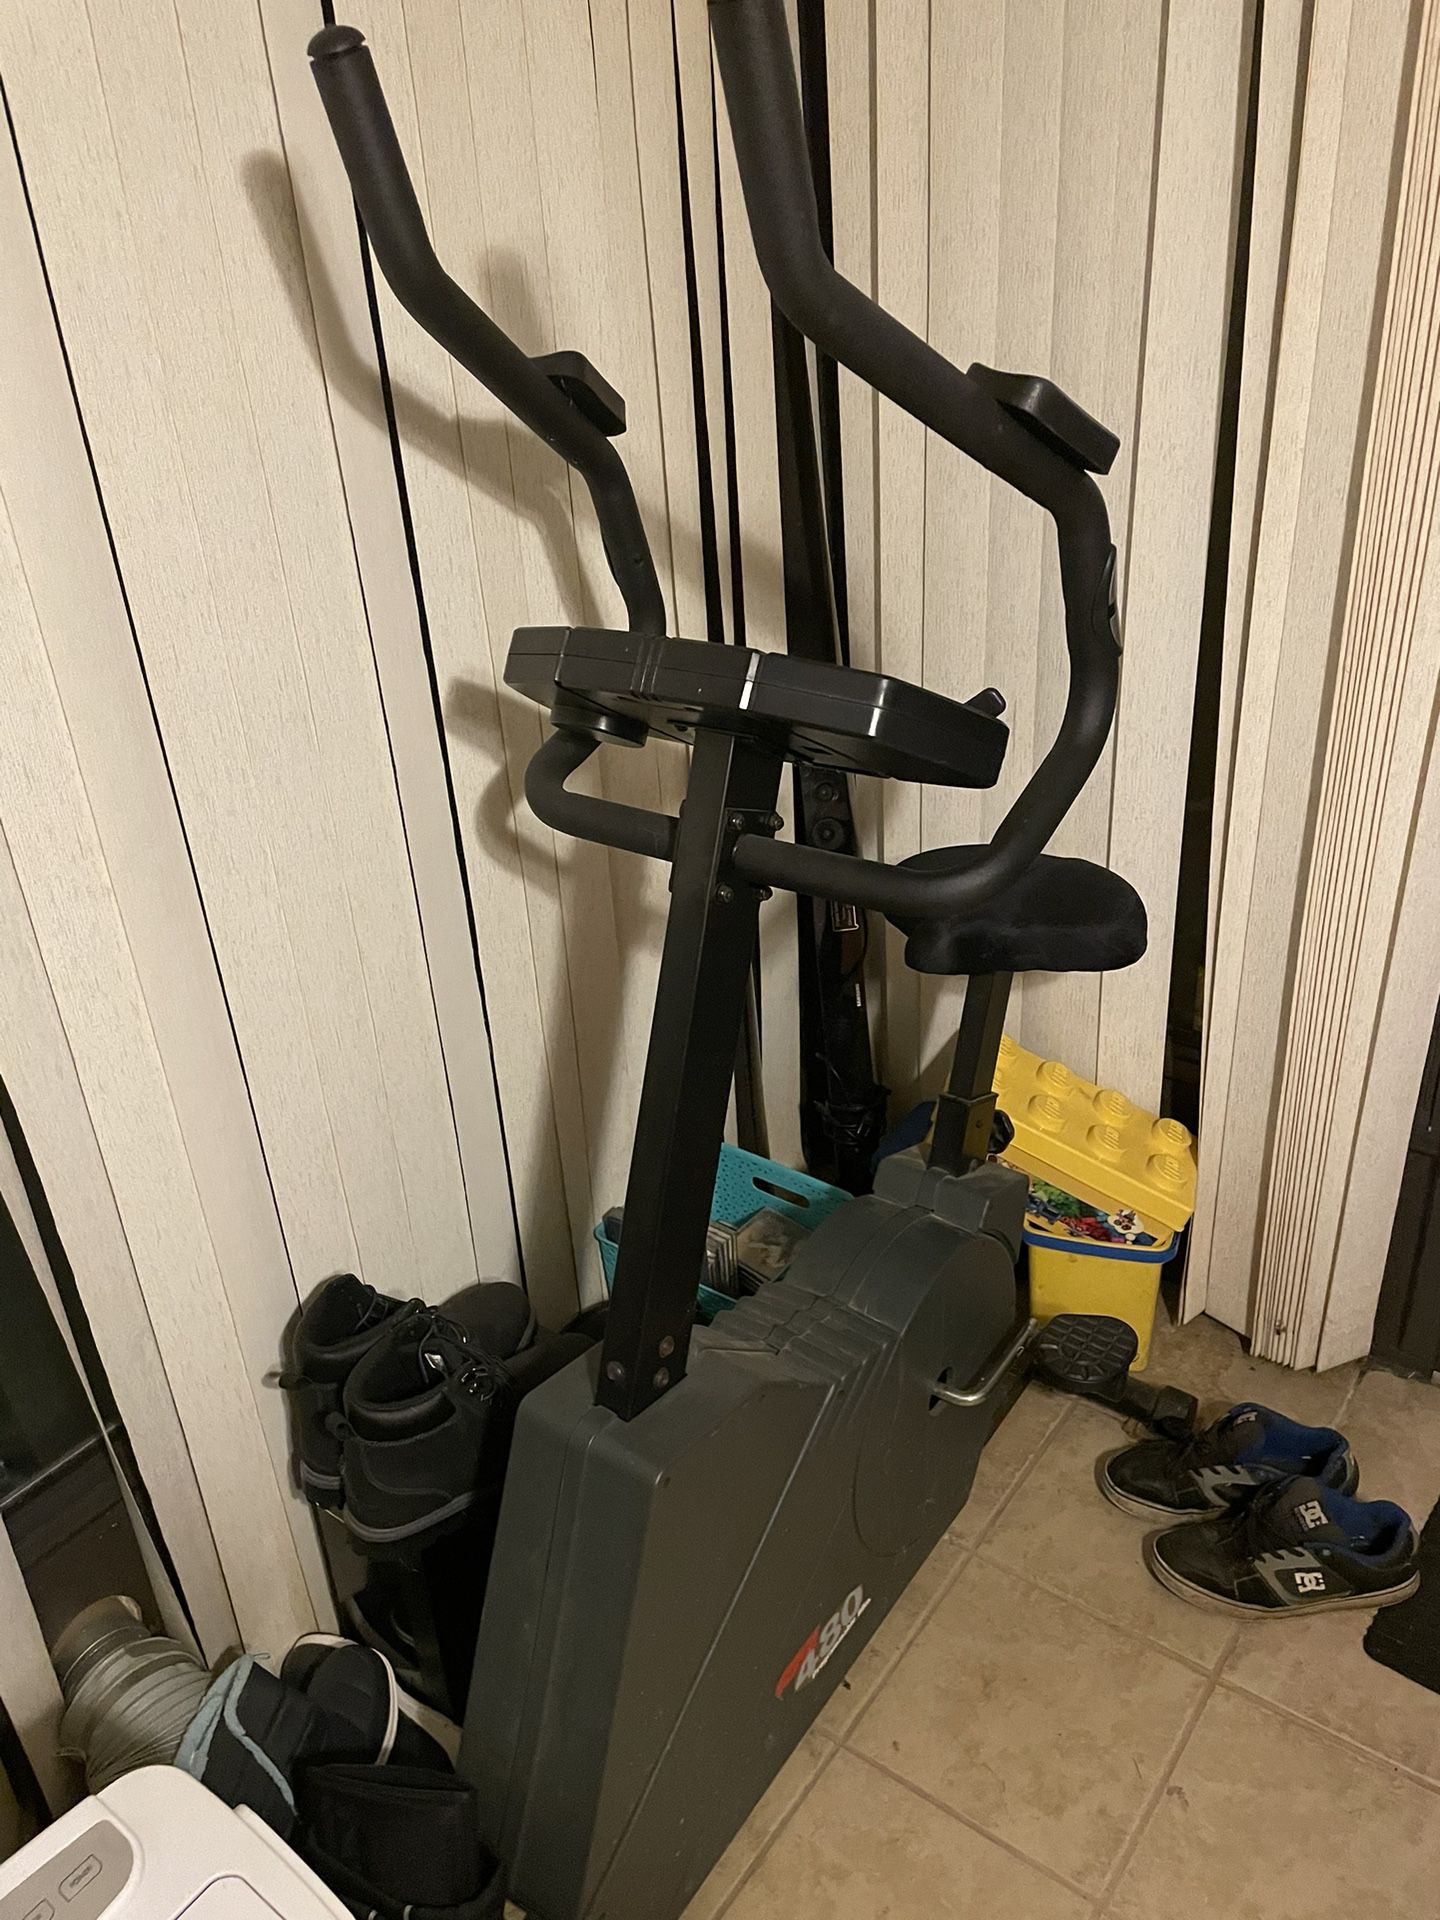 Fitness Quest Edge 480 Exercise Bike-REDUCED